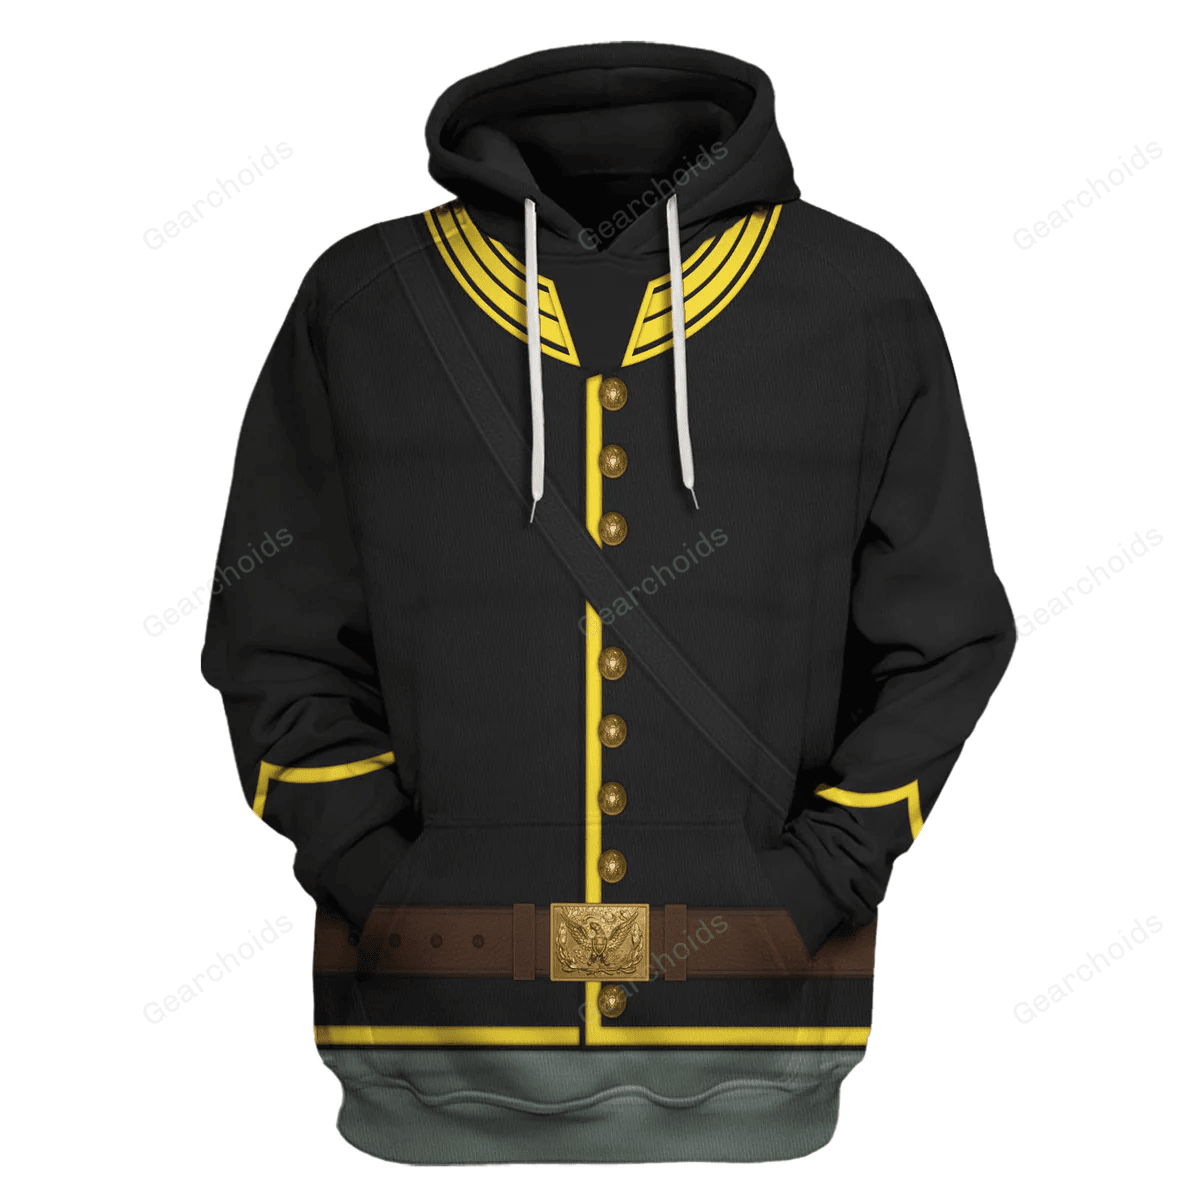 Gearchoids Union Army- Cavalry Trooper Uniform All Over Print Hoodie Sweatshirt T-Shirt Tracksuit